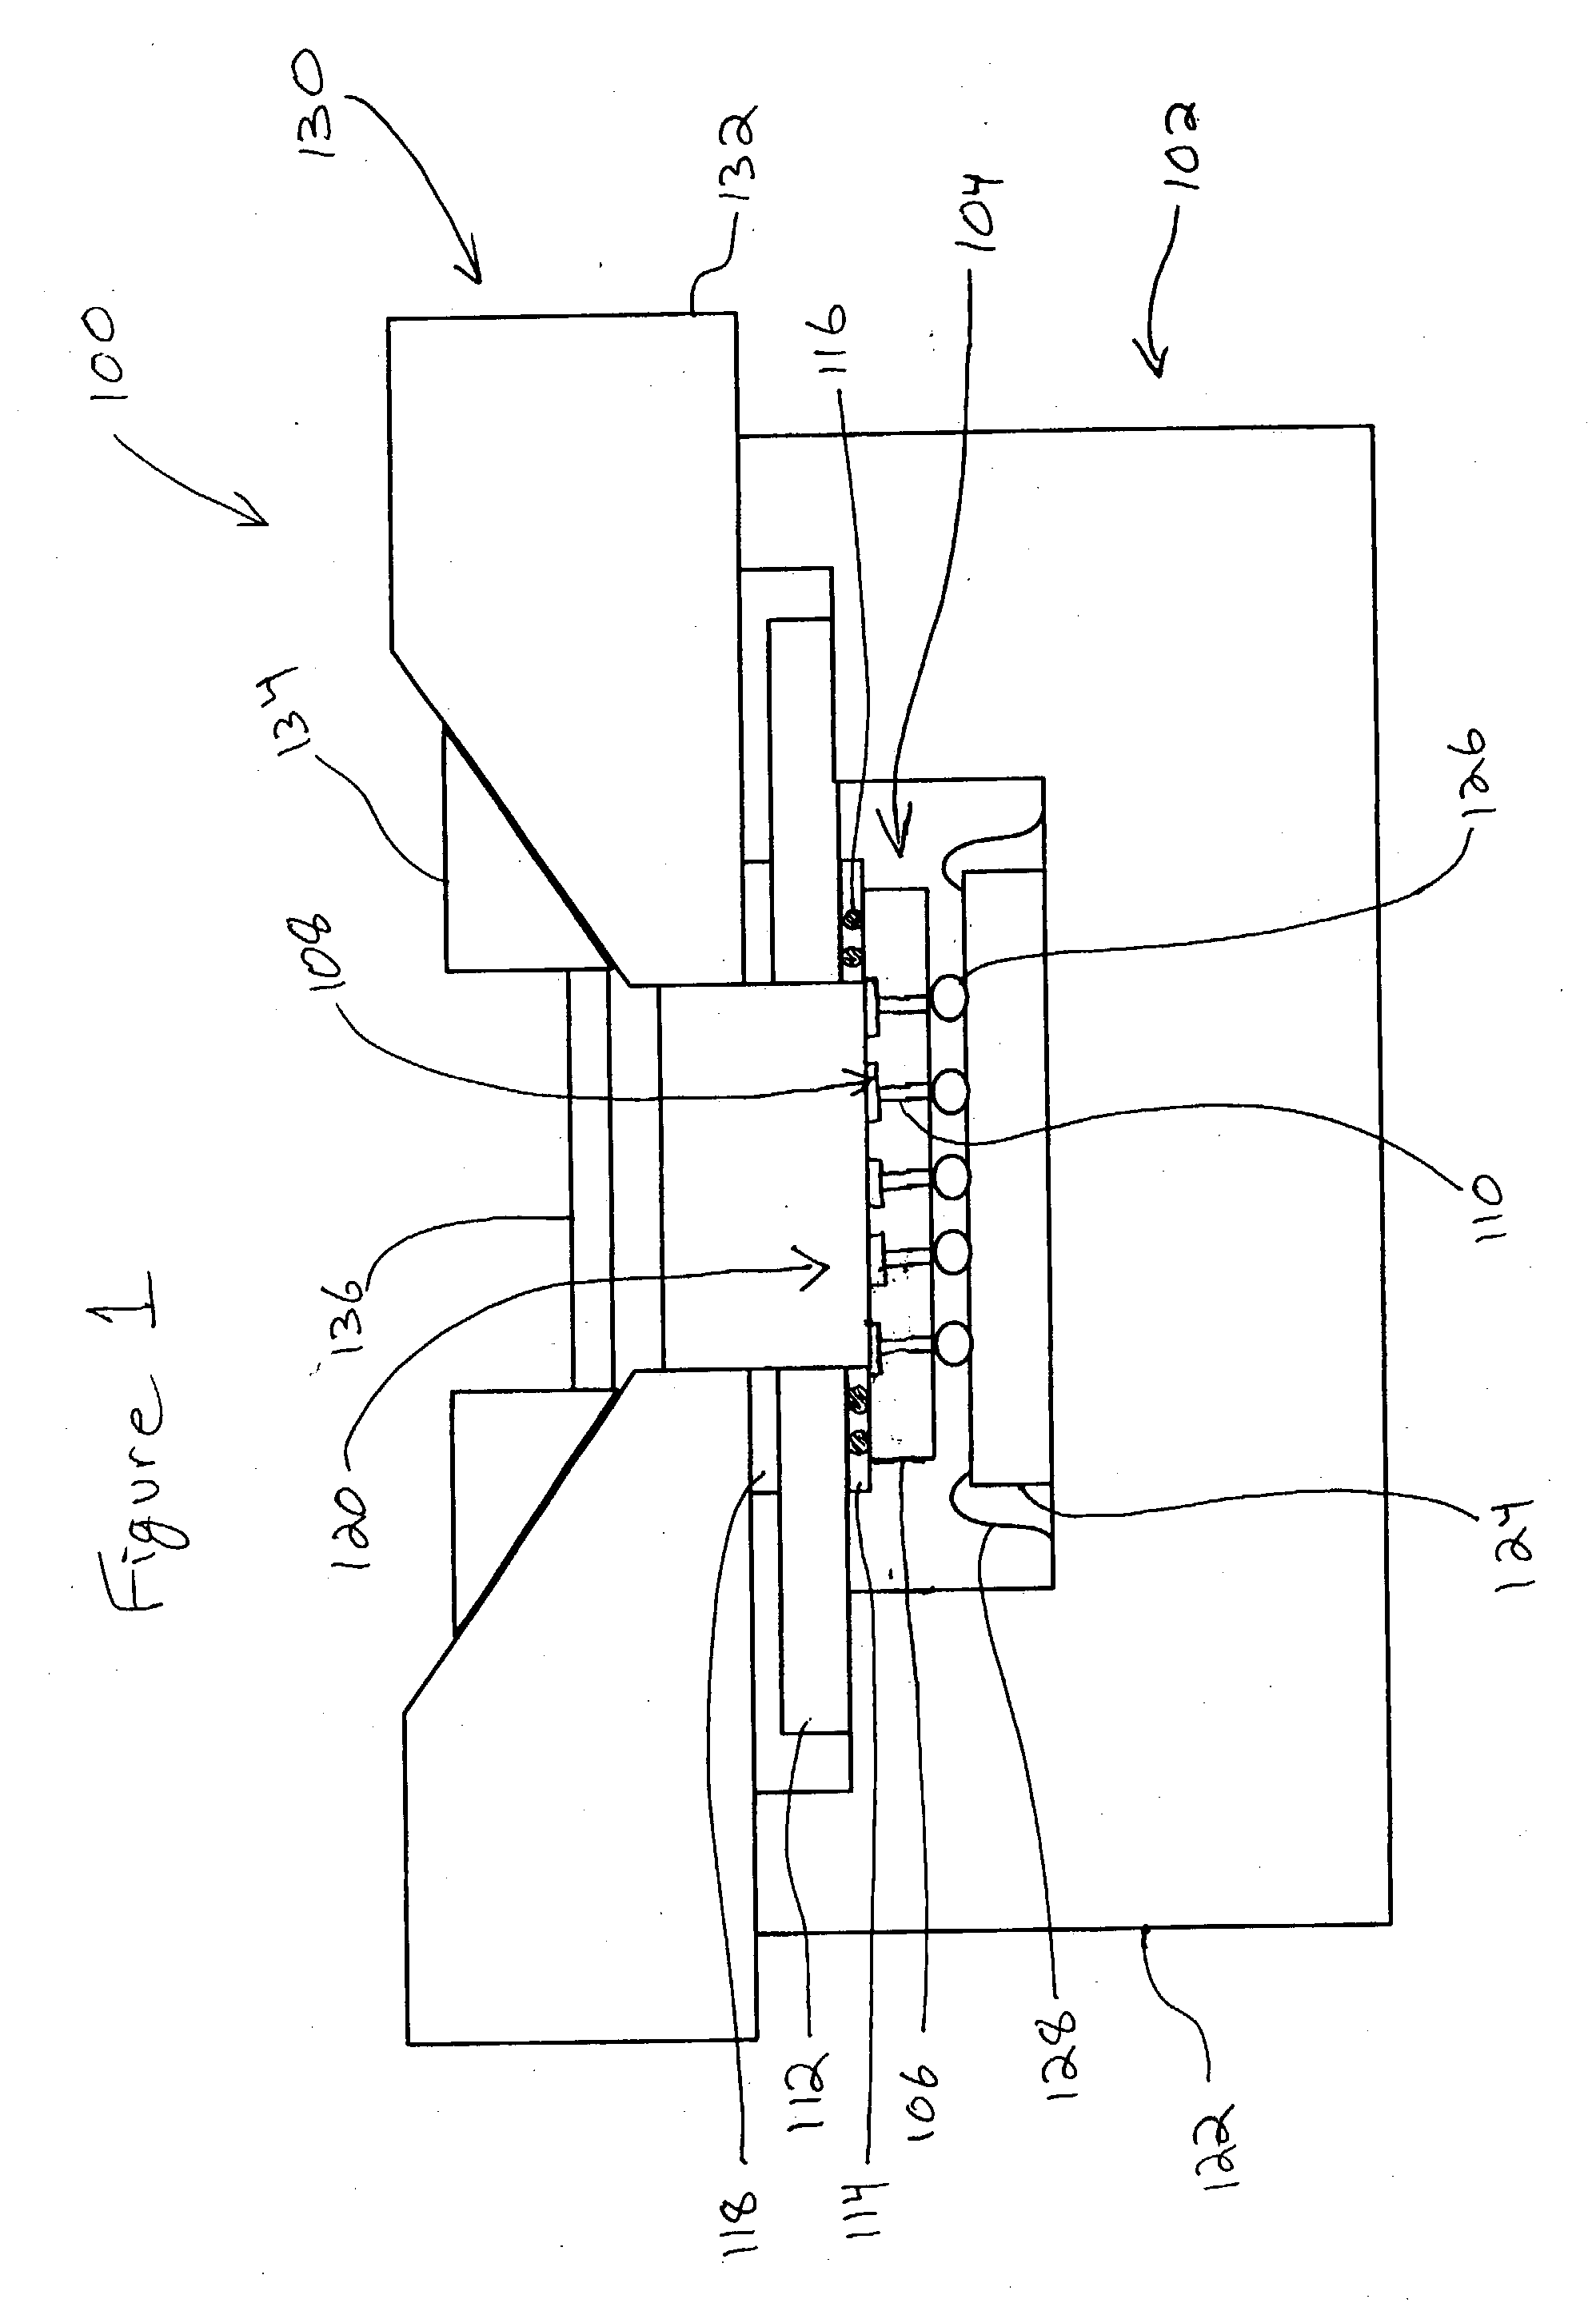 System and method for processing capacitive signals